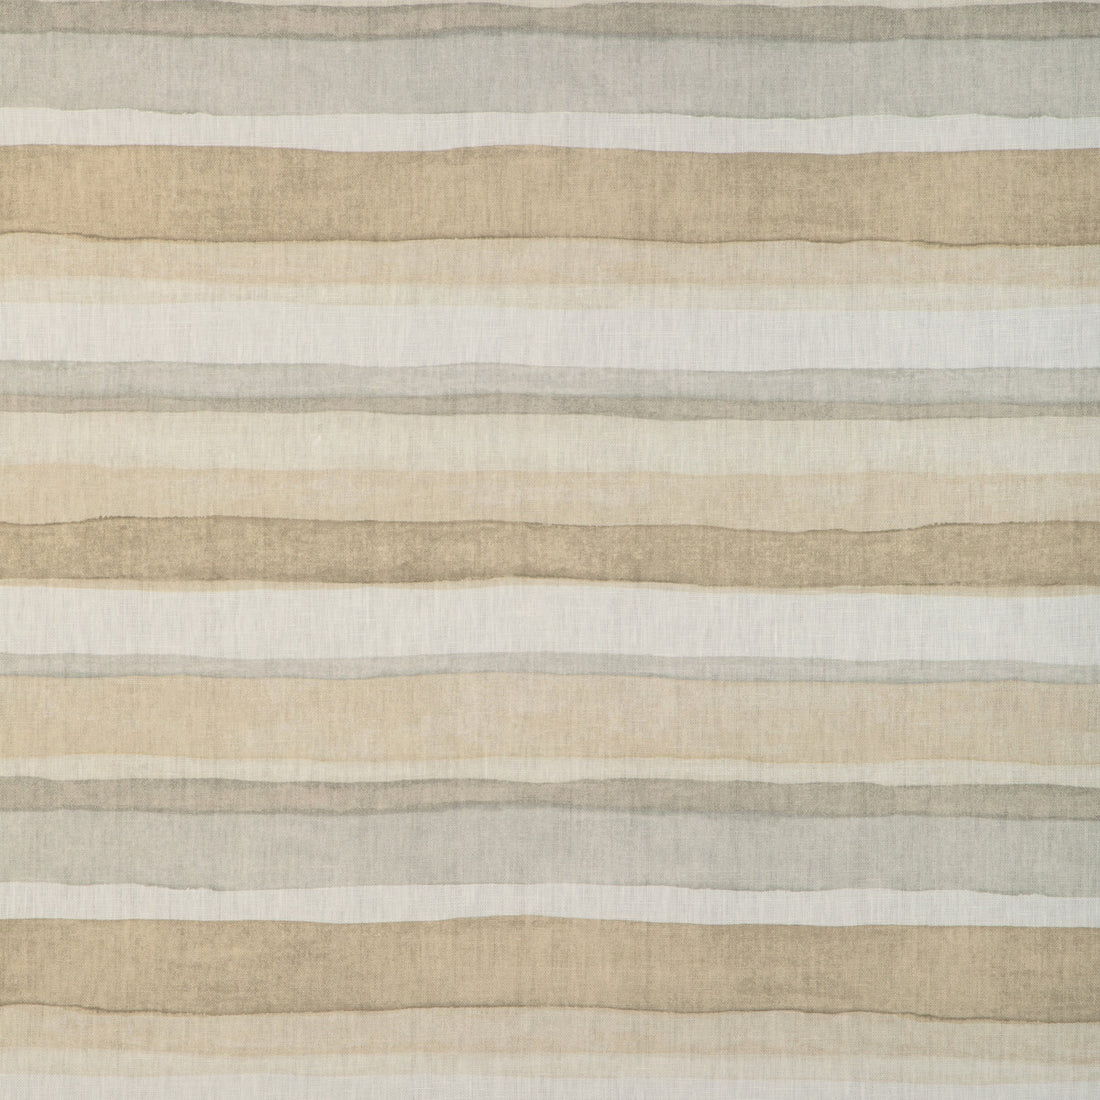 Malabo fabric in linen color - pattern MALABO.16.0 - by Kravet Basics in the Mid-Century Modern collection